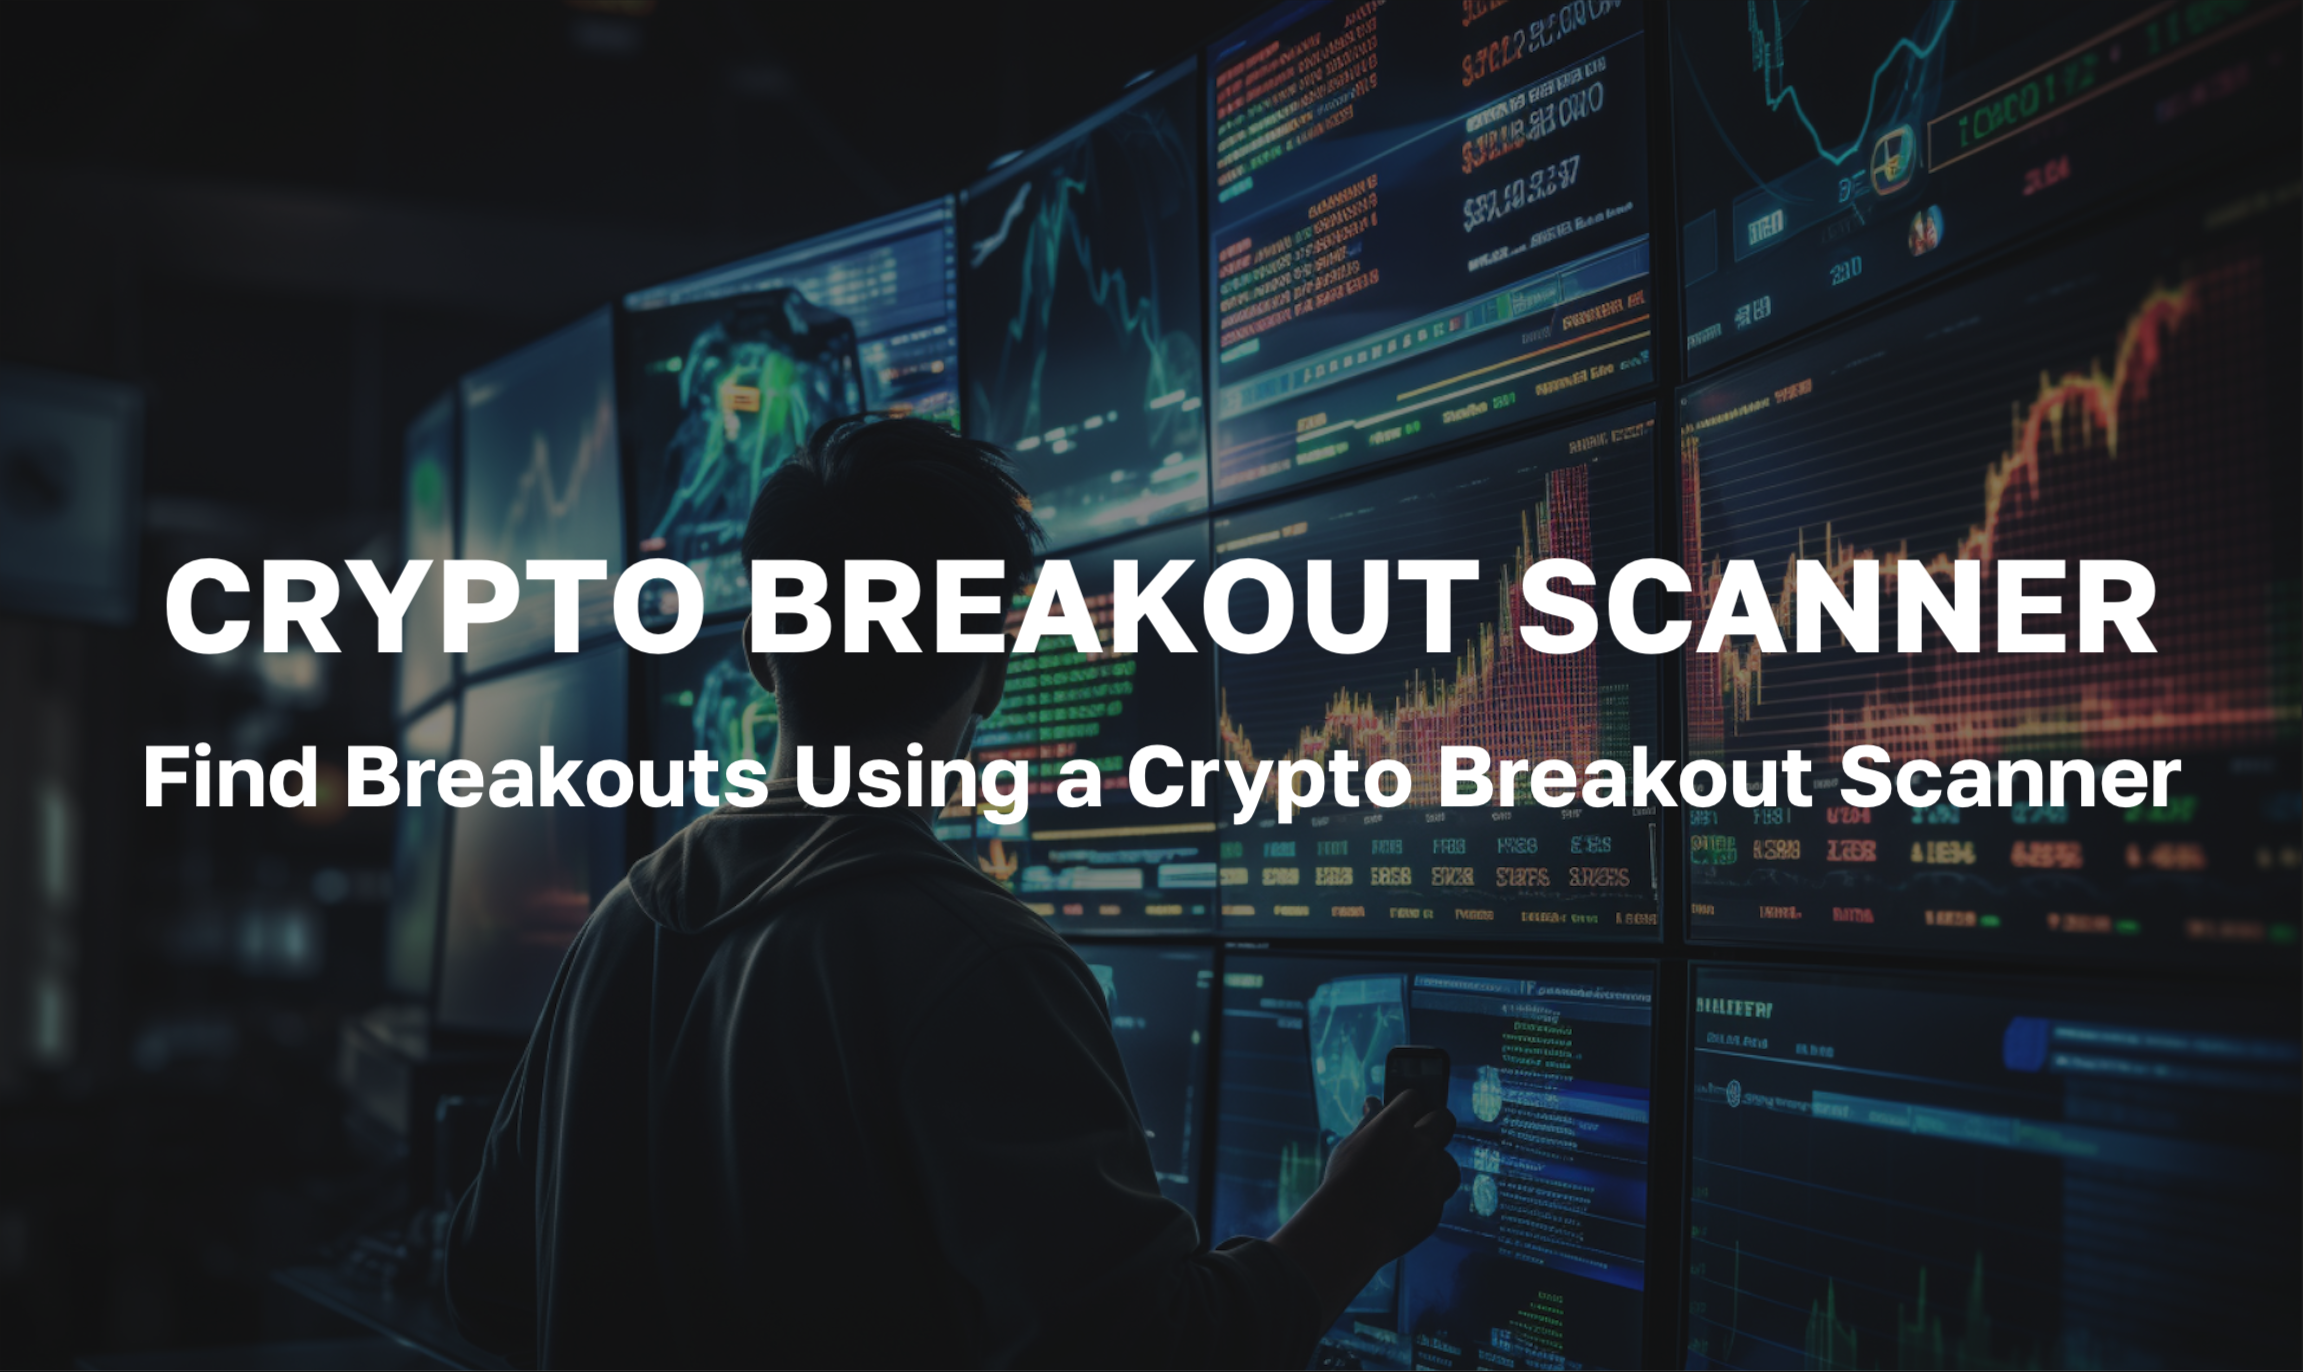 How to Find Crypto Breakouts Using a Crypto Breakout Scanner